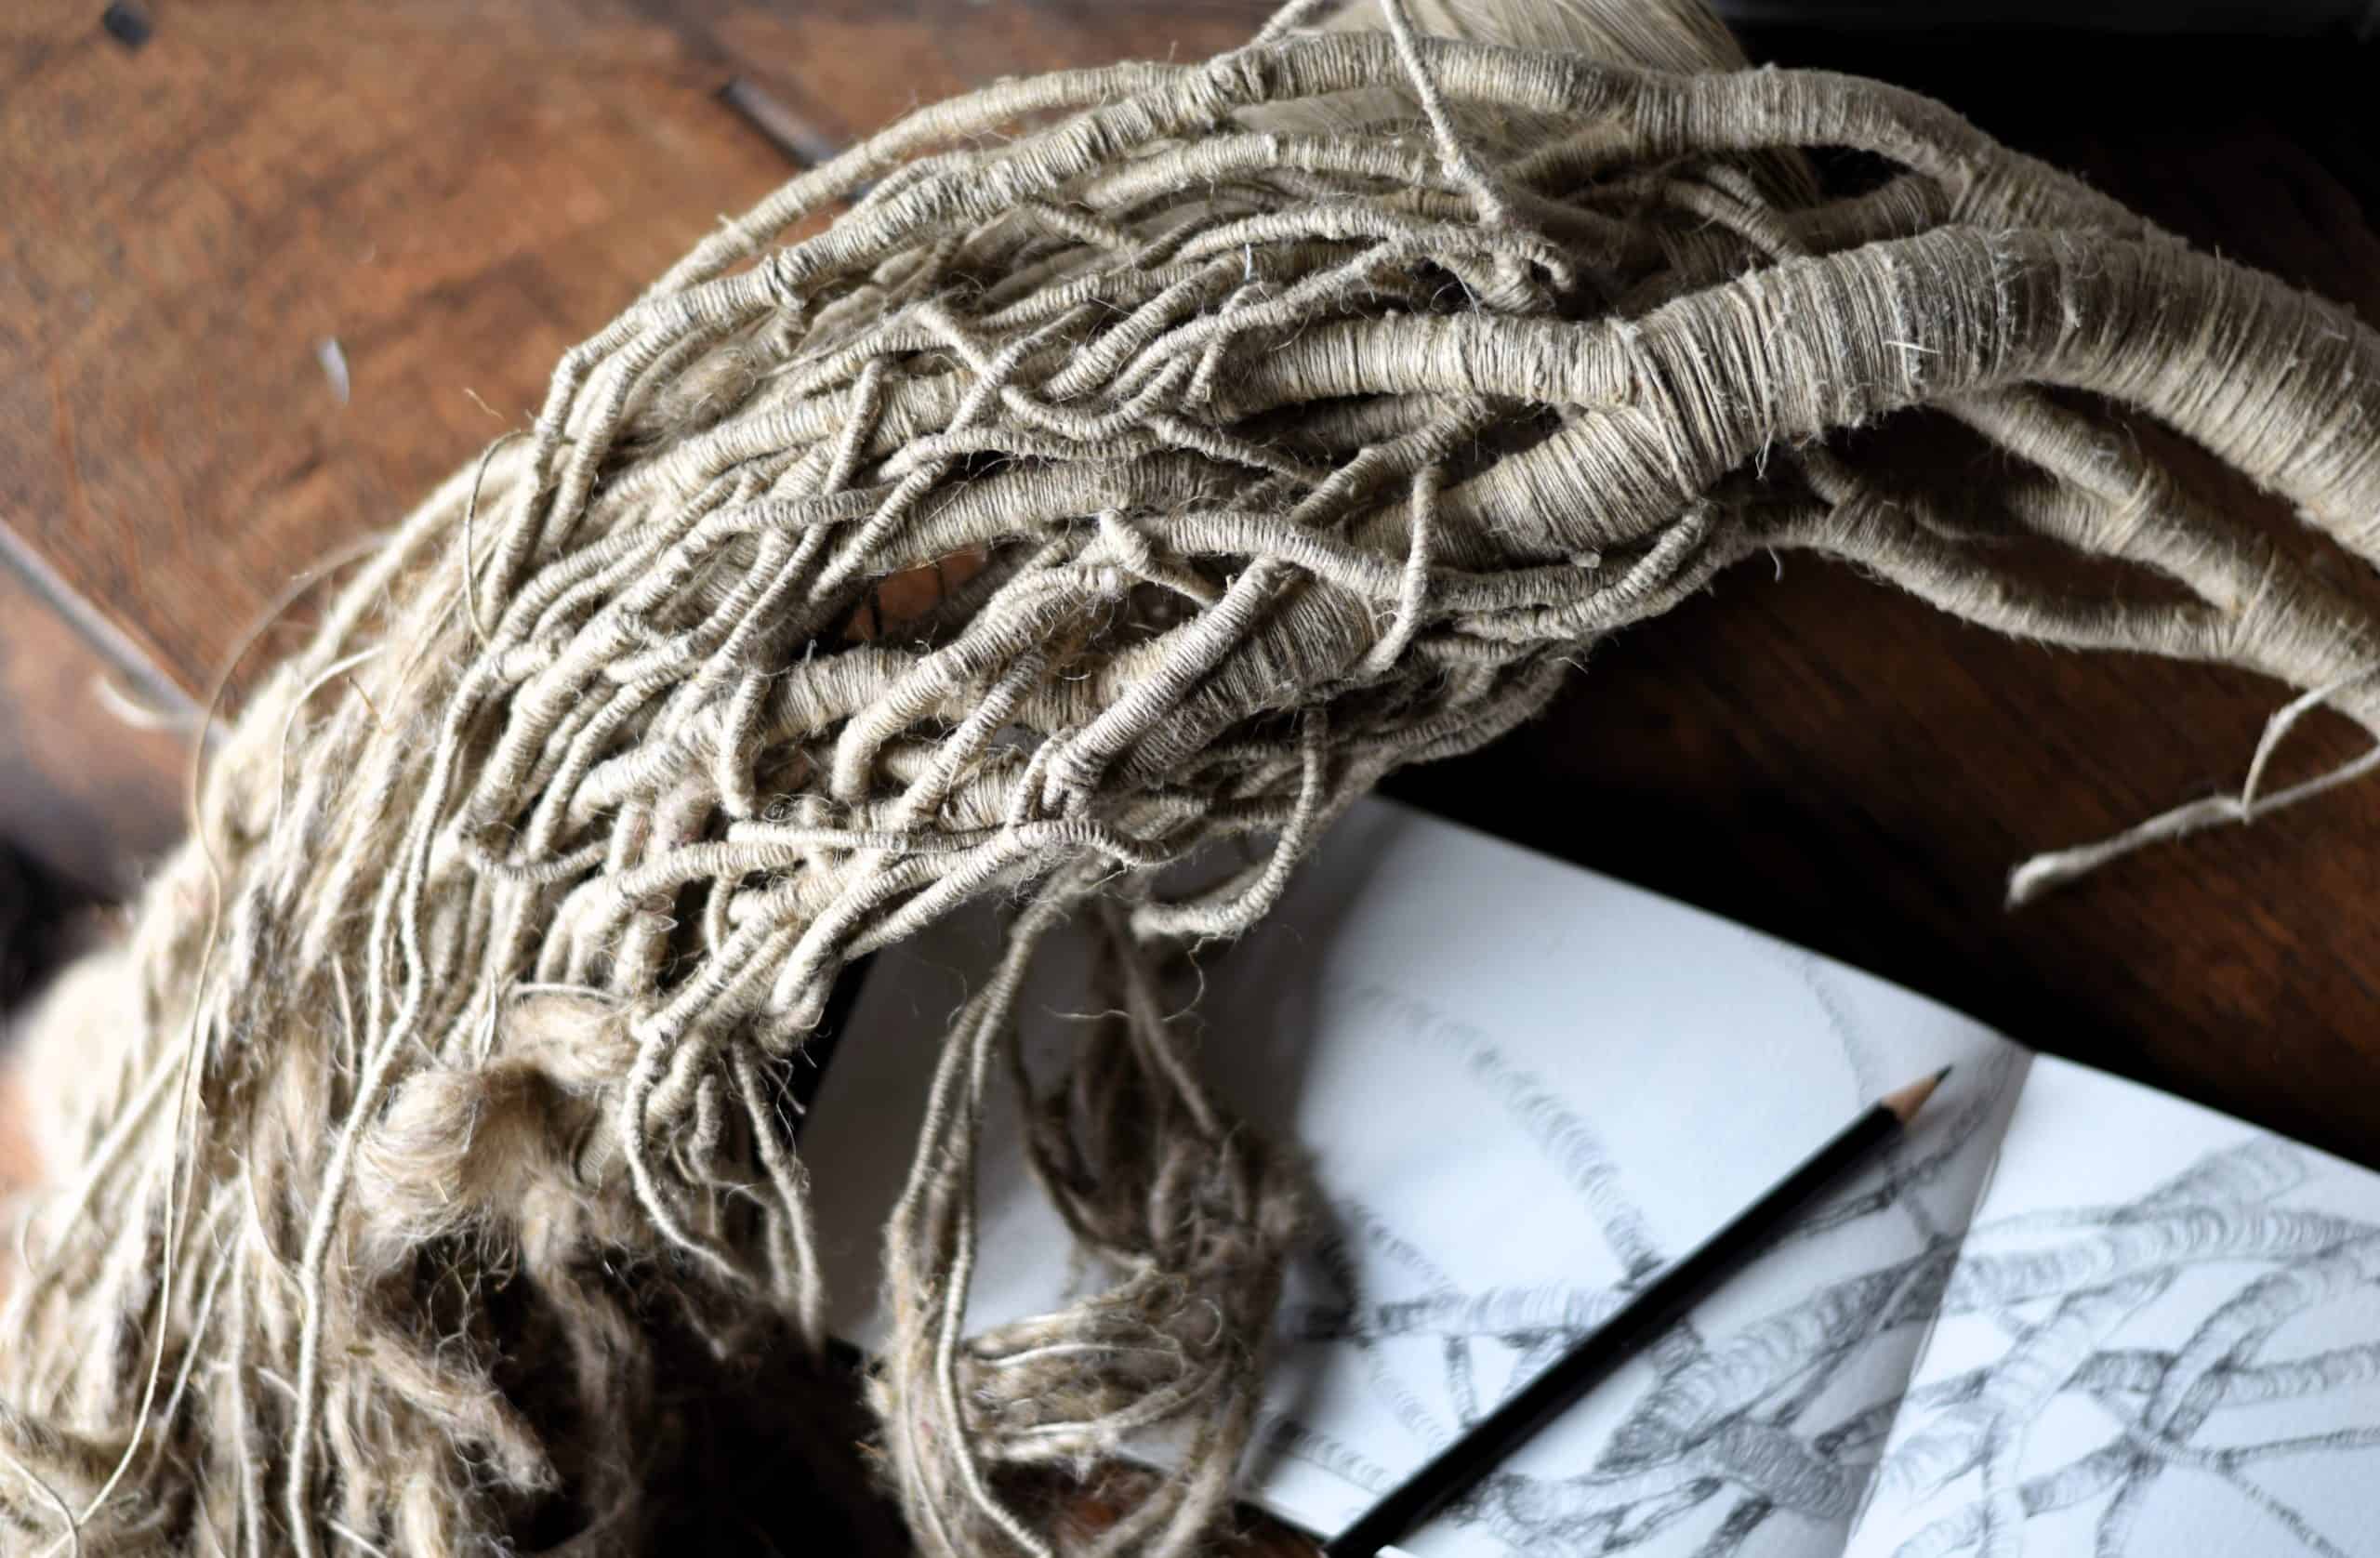 Unfinished sculpture by Aude Franjou with open sketchbook and pencil